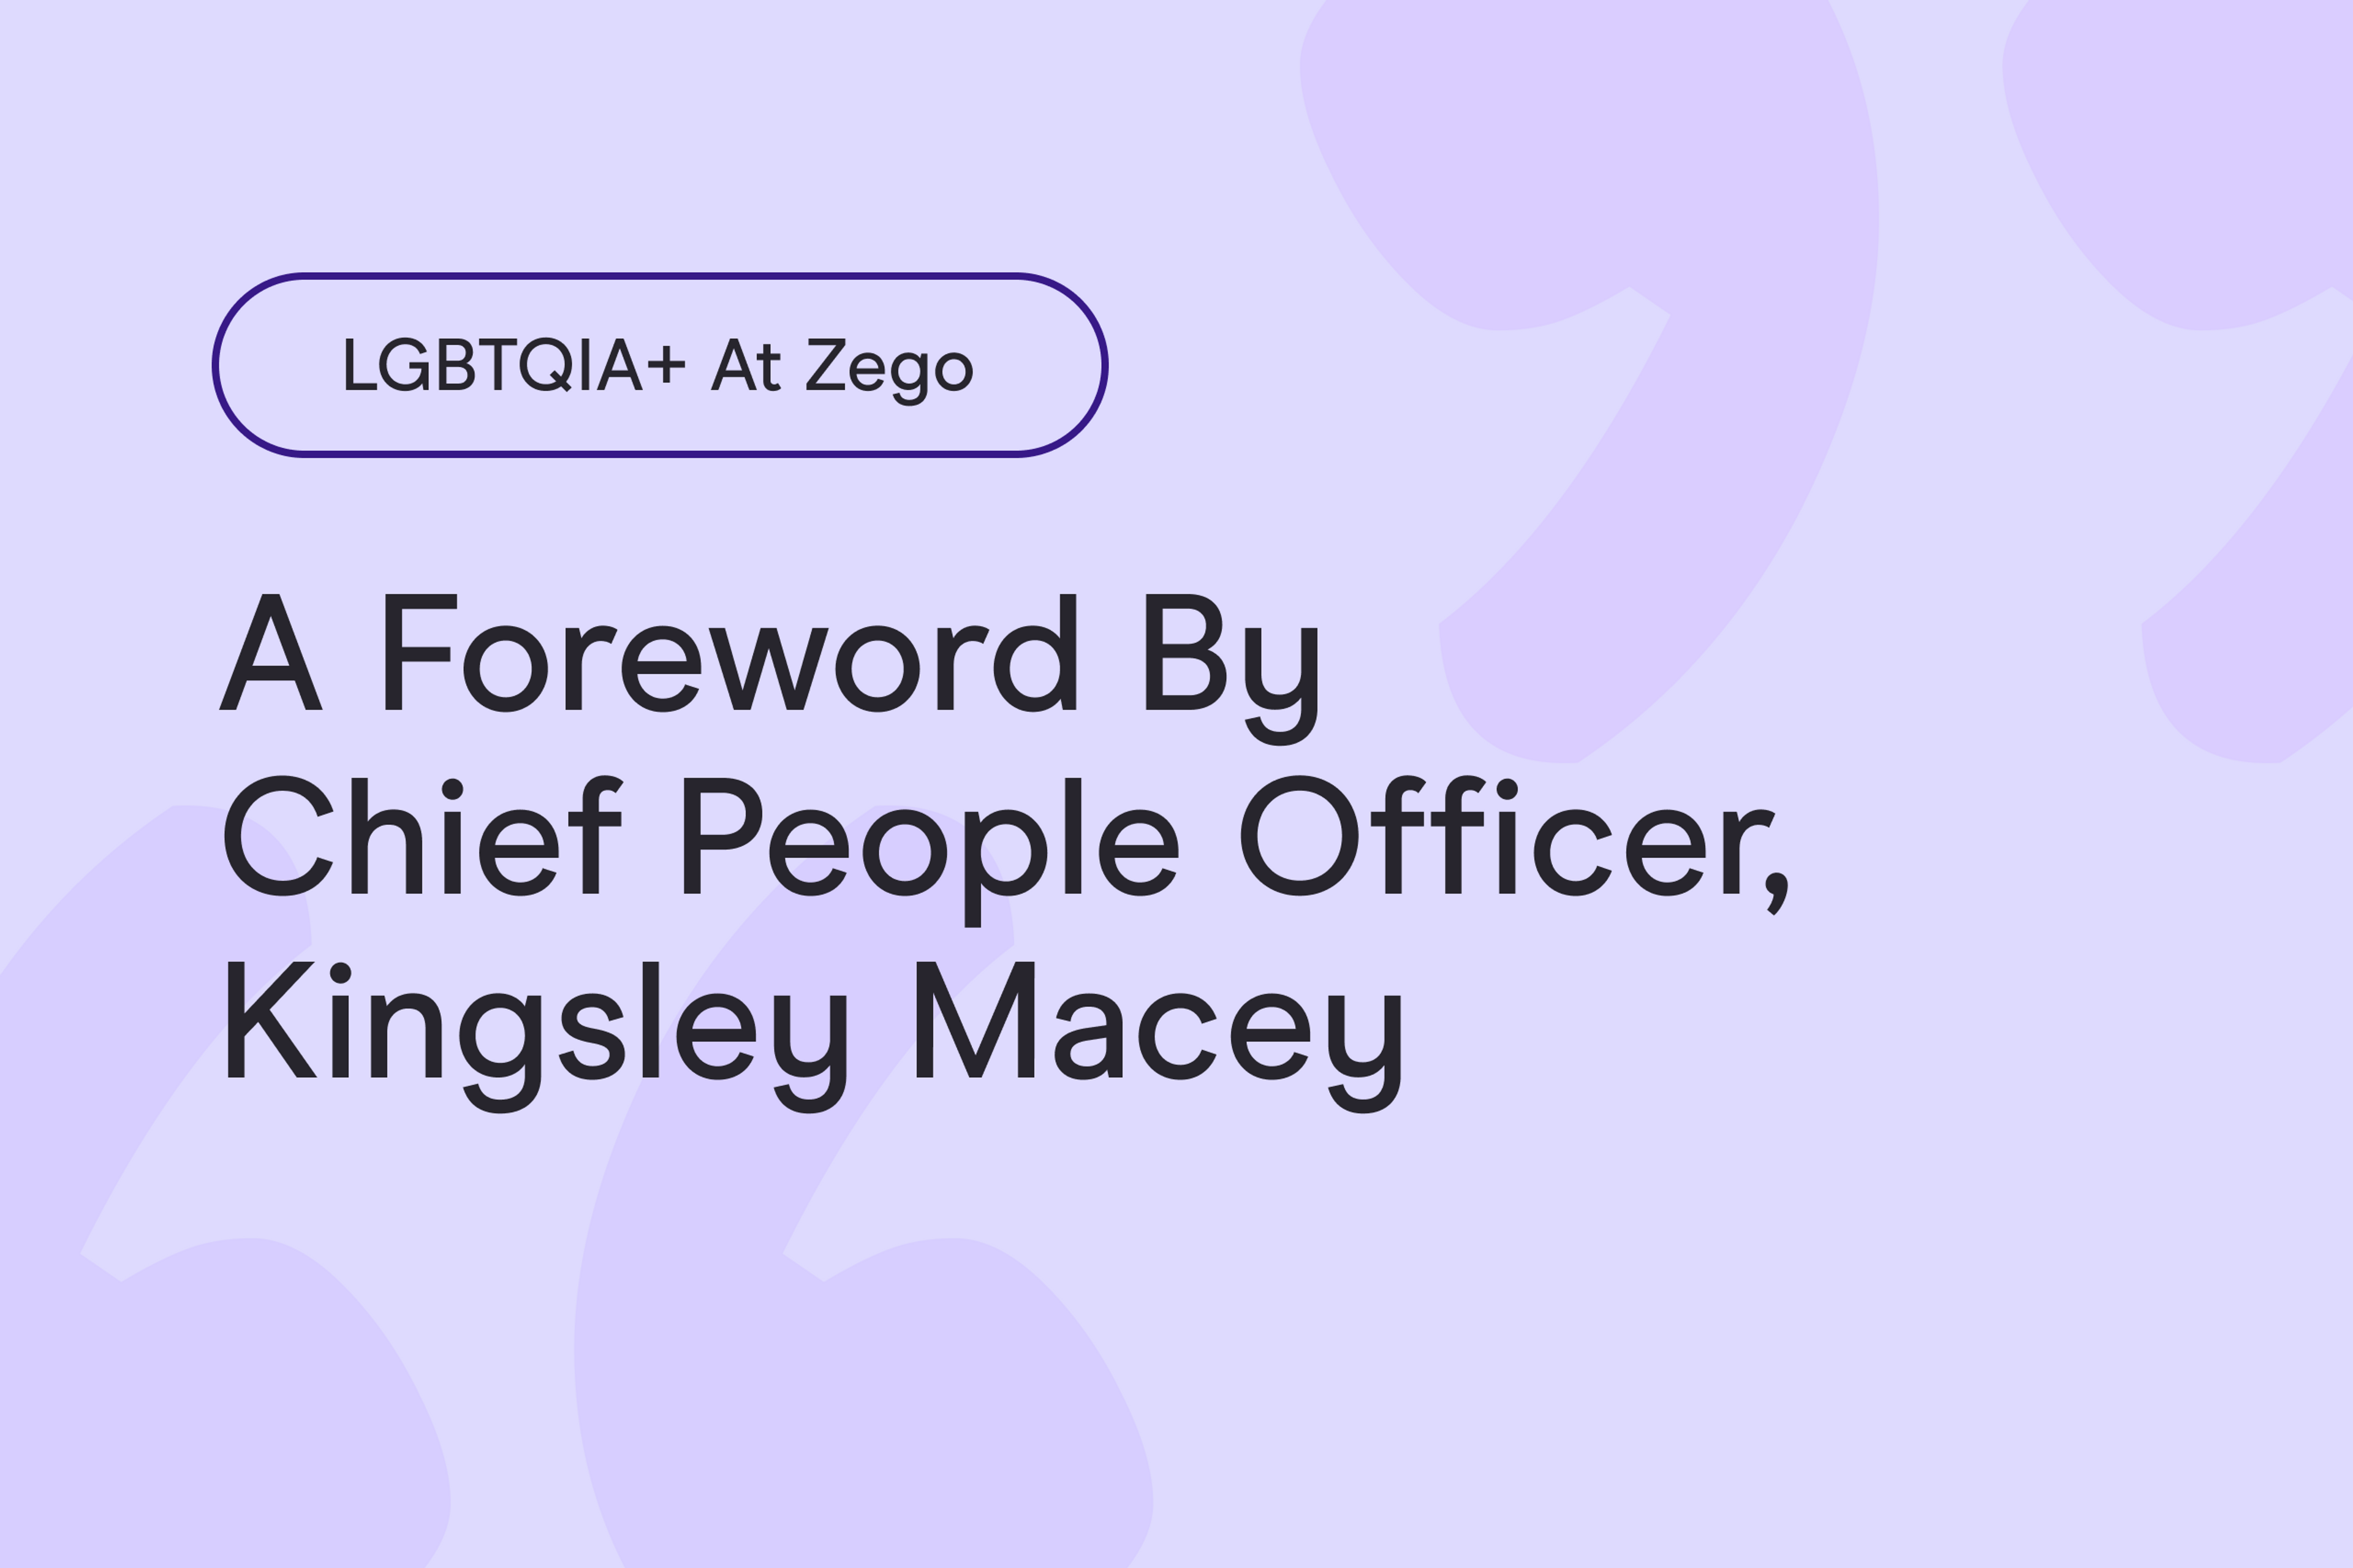 LGBTIQA+ at Zego: a foreword by Chief People Officer, Kingsley Macey